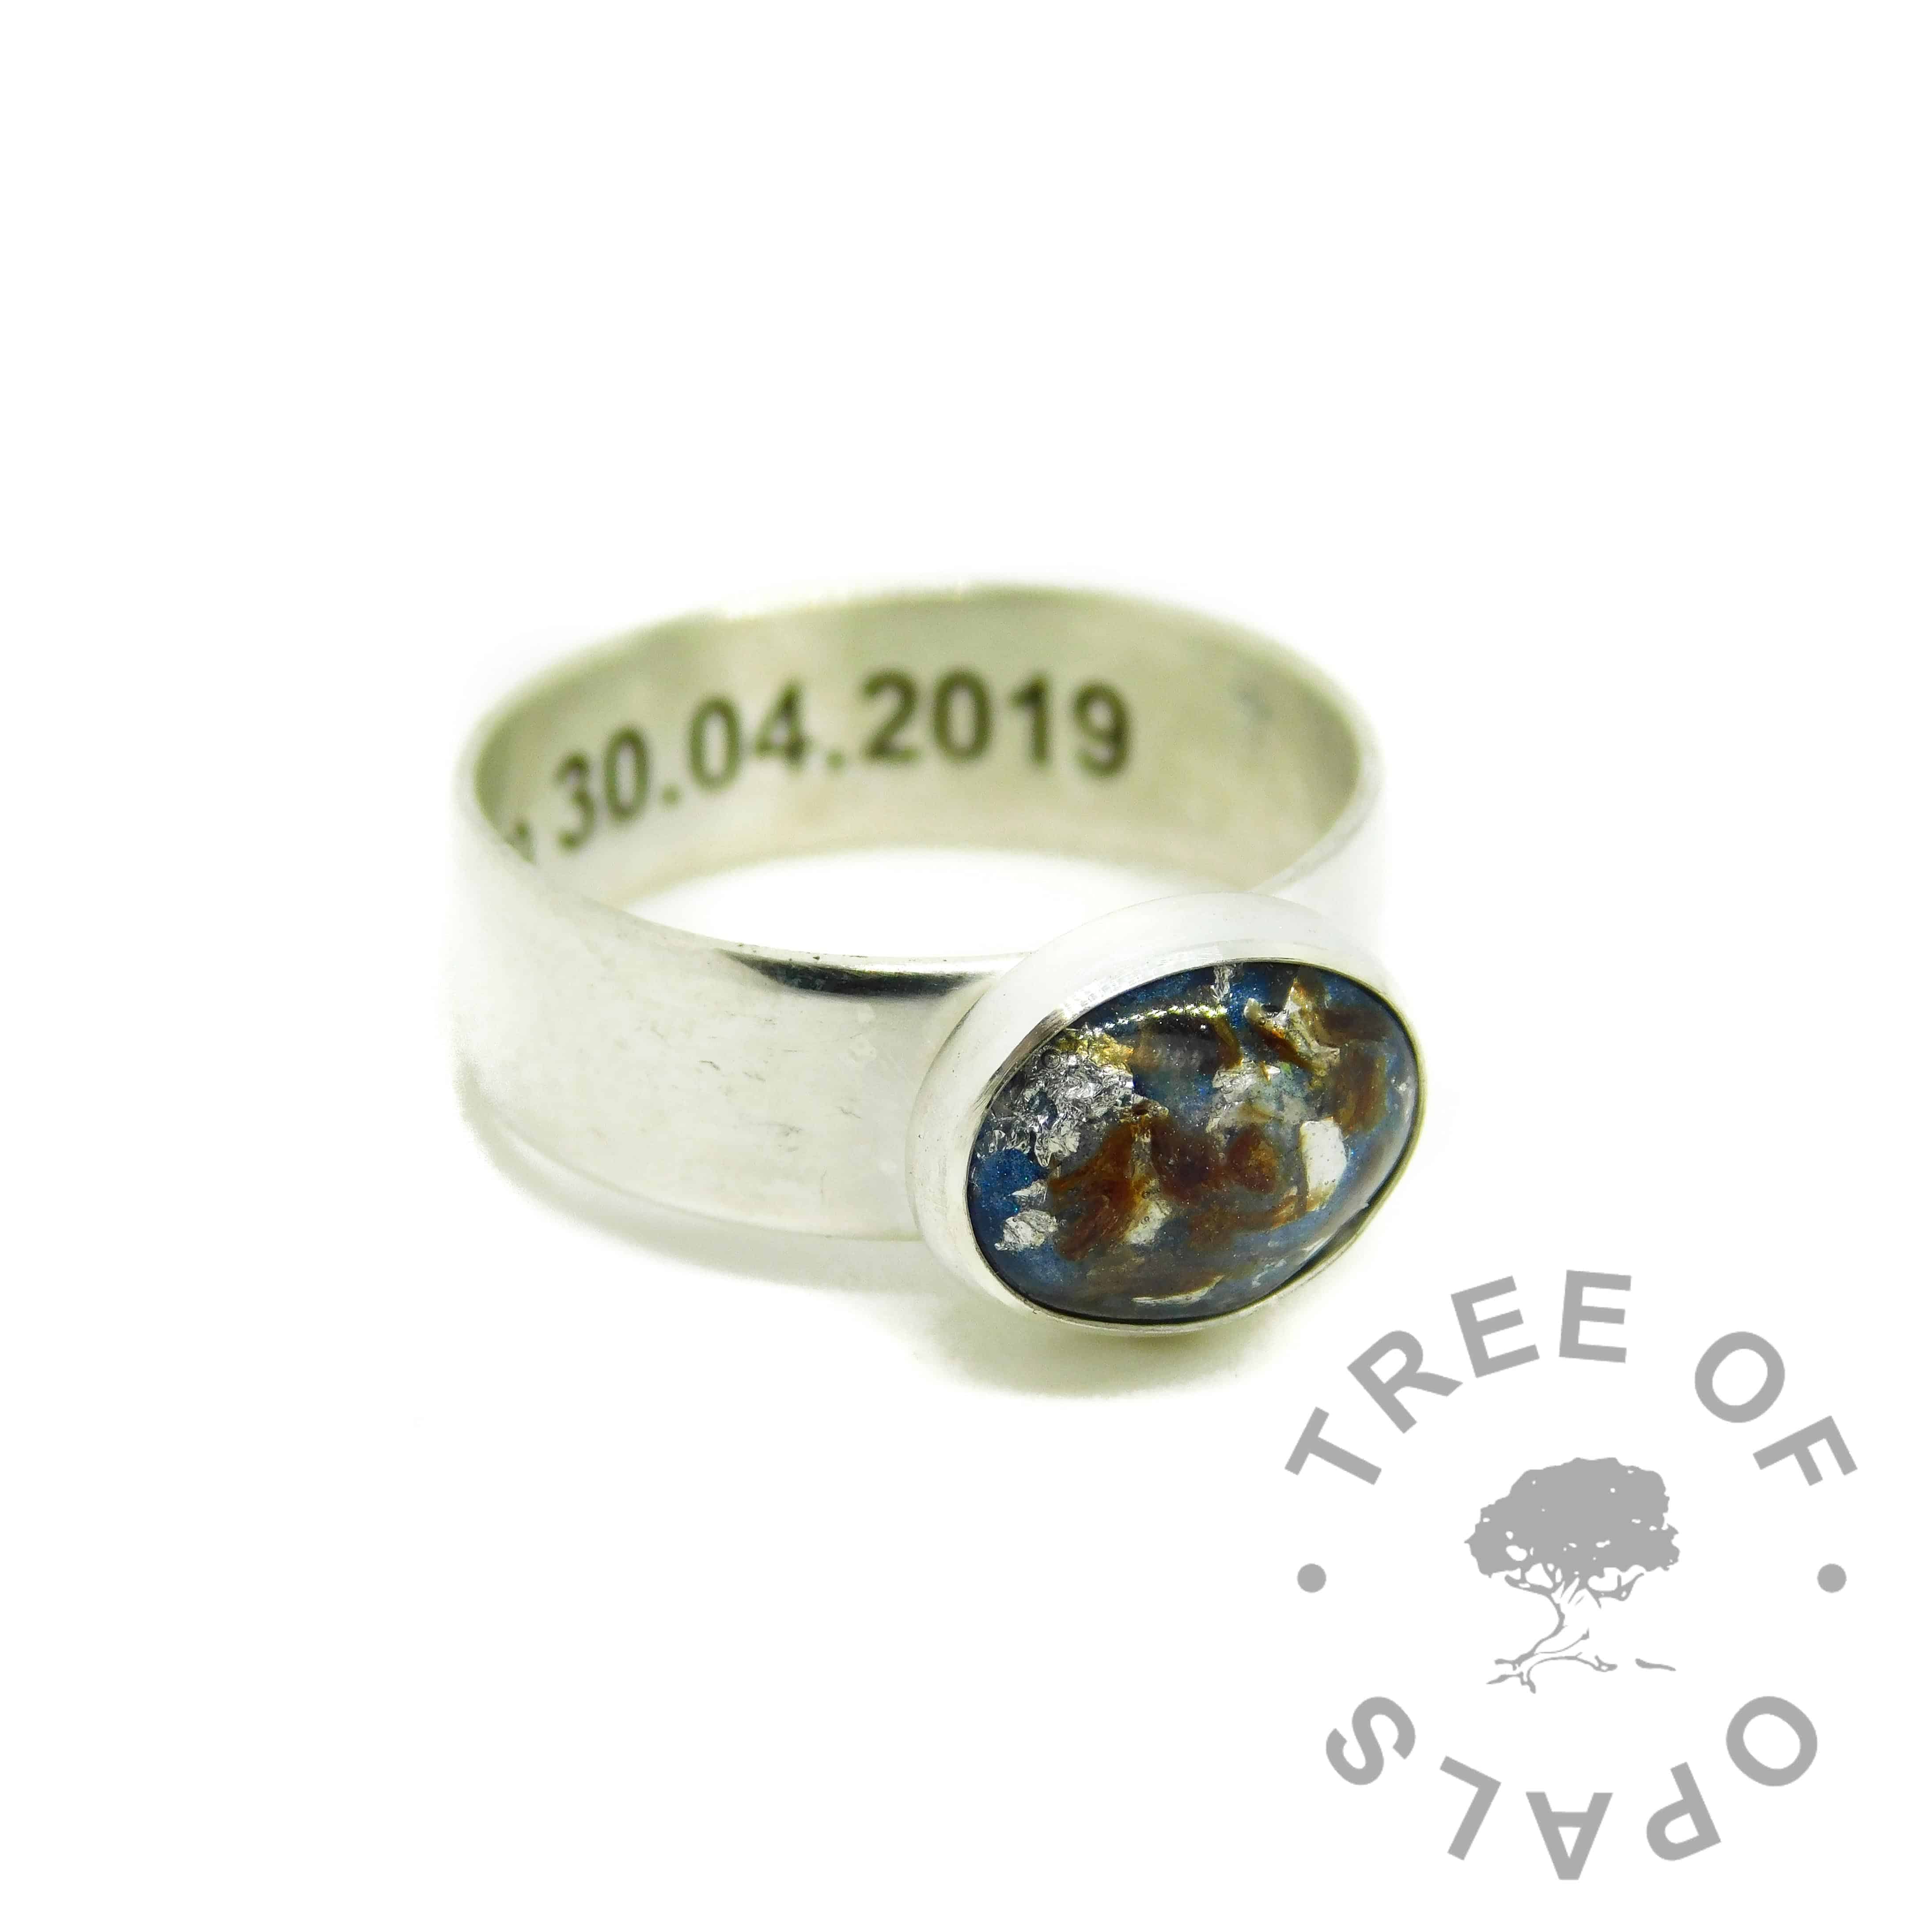 umbilical cord ring aegean blue resin sparkle mix and silver leaf, 6mm wide shiny engraved band